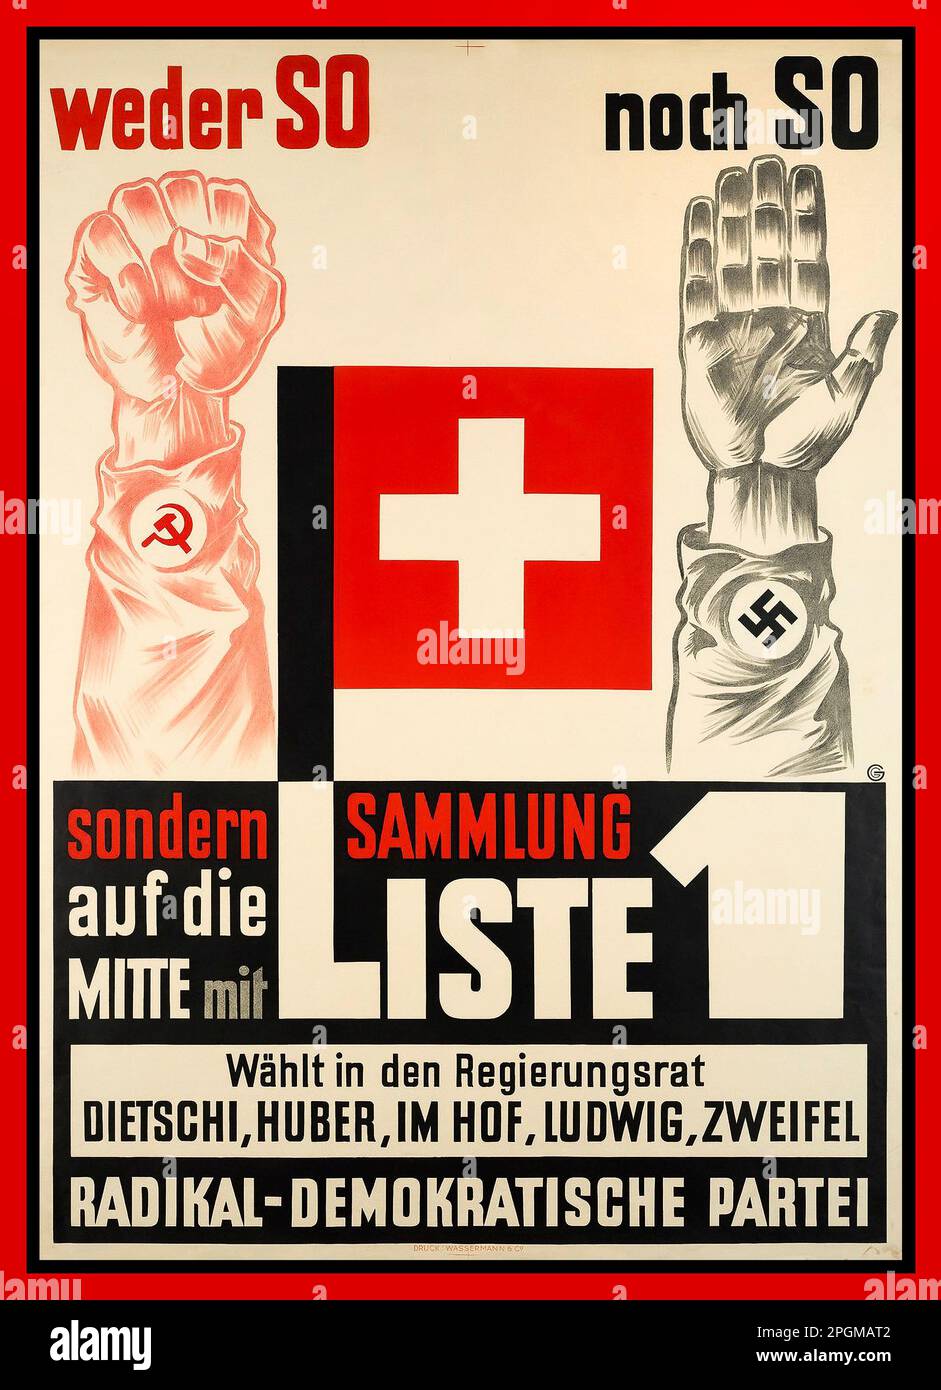 SWISS 1939 Federal Election Poster Radical Democratic Party featuring two hands raised, one Communist with hammer and sickle, the other Nazi Party with a swastika.  Weder So noch So, sondern Sammlung auf die mitte mit Liste 1 Fritz GROGG  Neither so nor not so, but a collection to the middle with list 1 Voting in the Swiss Elections. The Free Democratic Party was voted first. Fritz GROGG 1938 Stock Photo